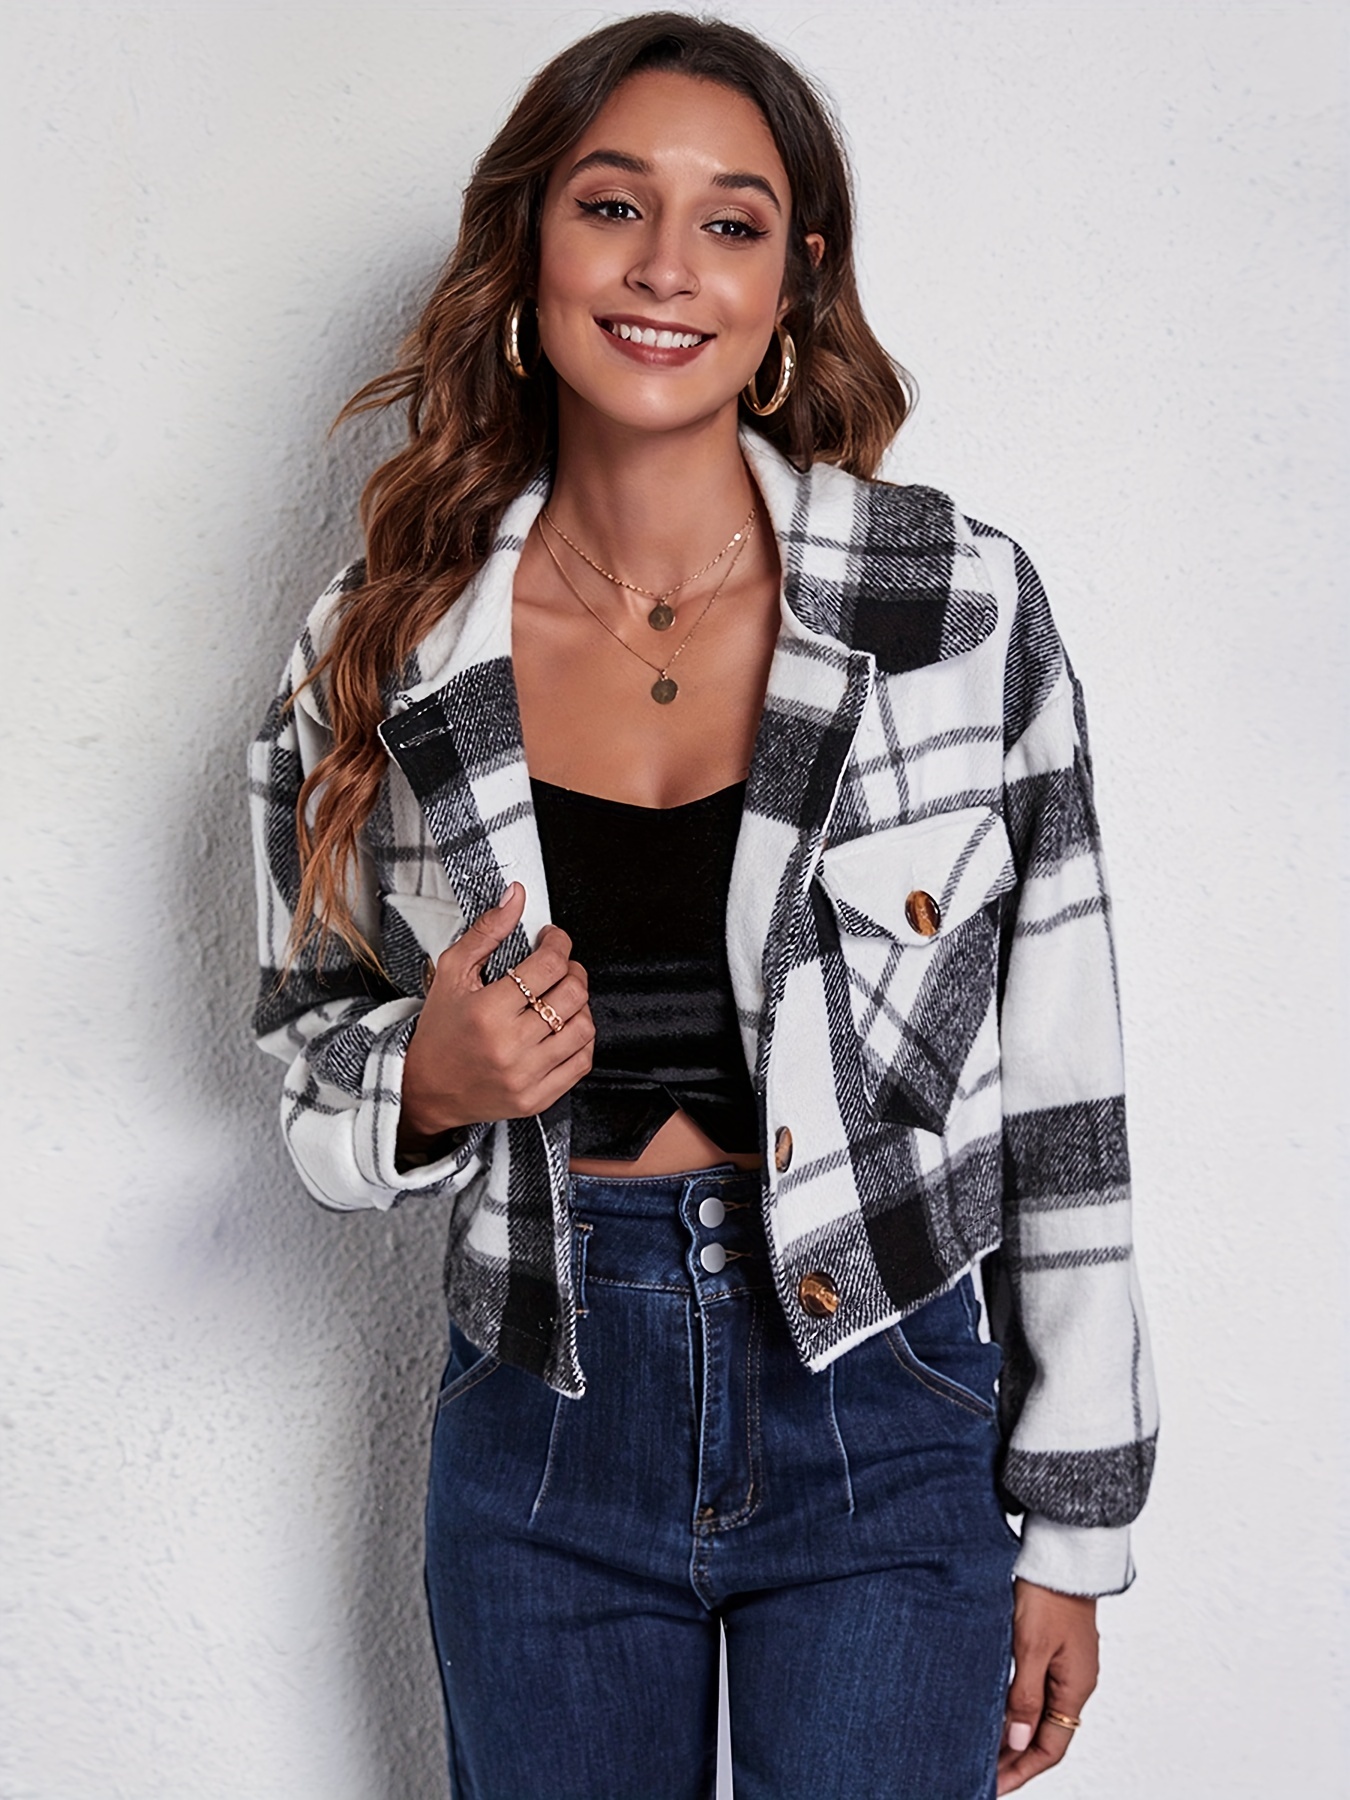 DanceeMangoos Cropped Shacket Jacket Women for Fall Fashion Plaid Flannel  Button Down Shirts Tops Nashville Country Outfits